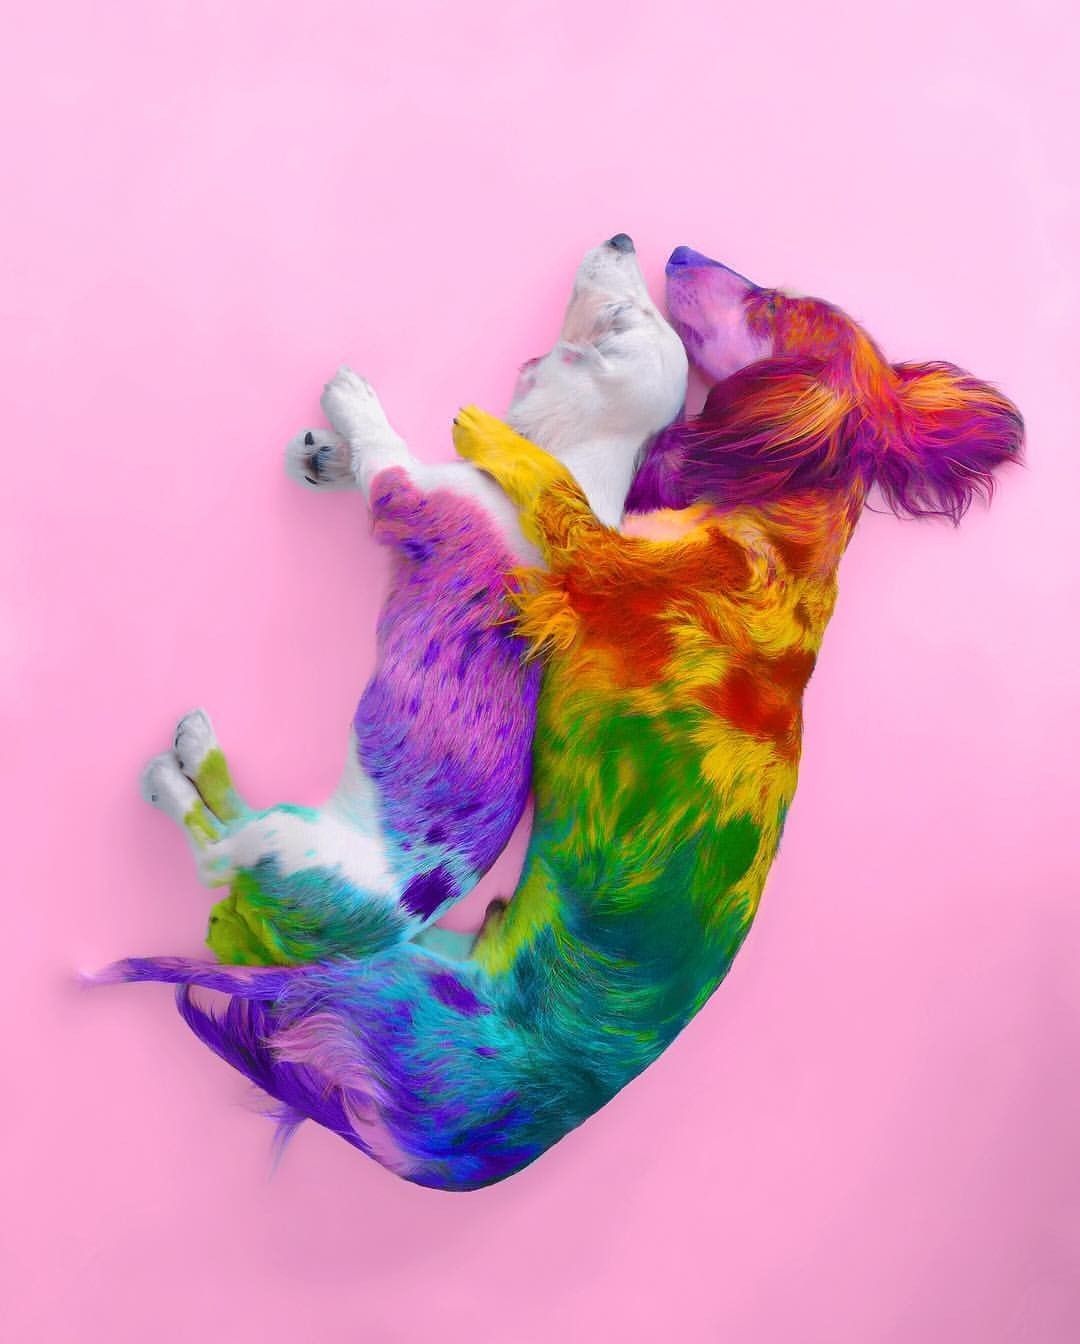 Rainbow Dog Wallpapers - Wallpaper Cave